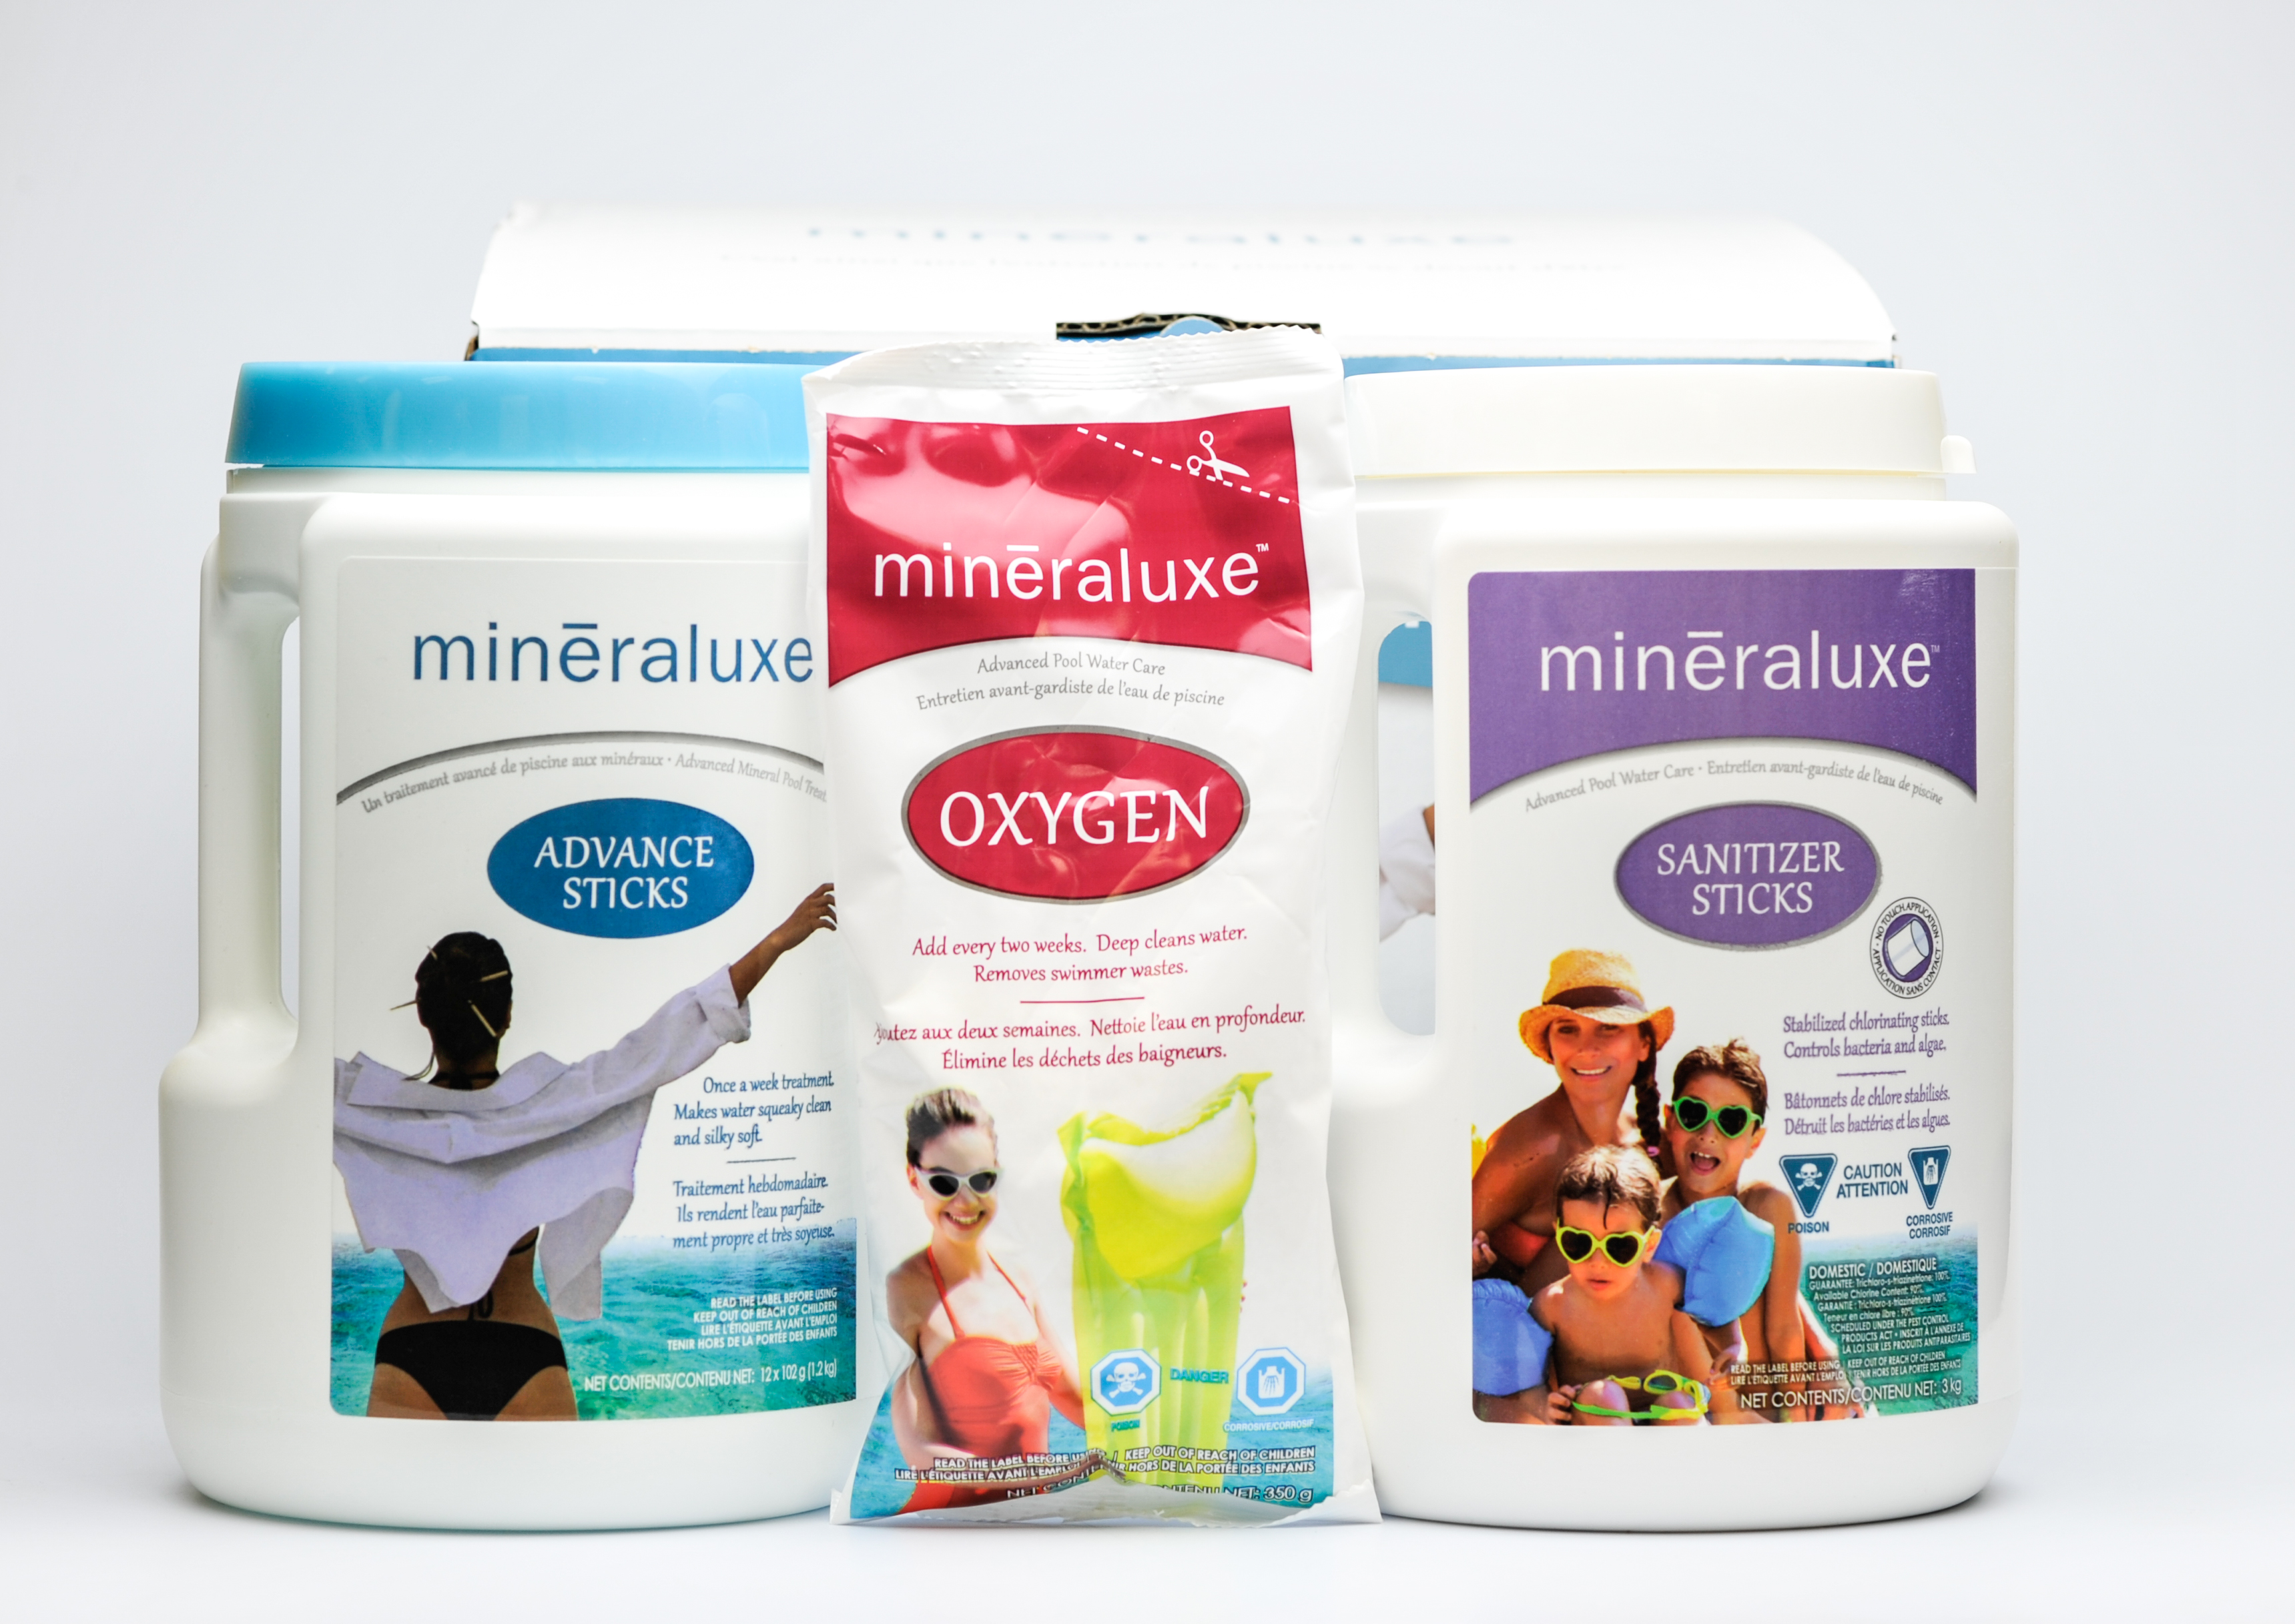 Mineraluxe Complete Pool Care Kit (Oxygen)